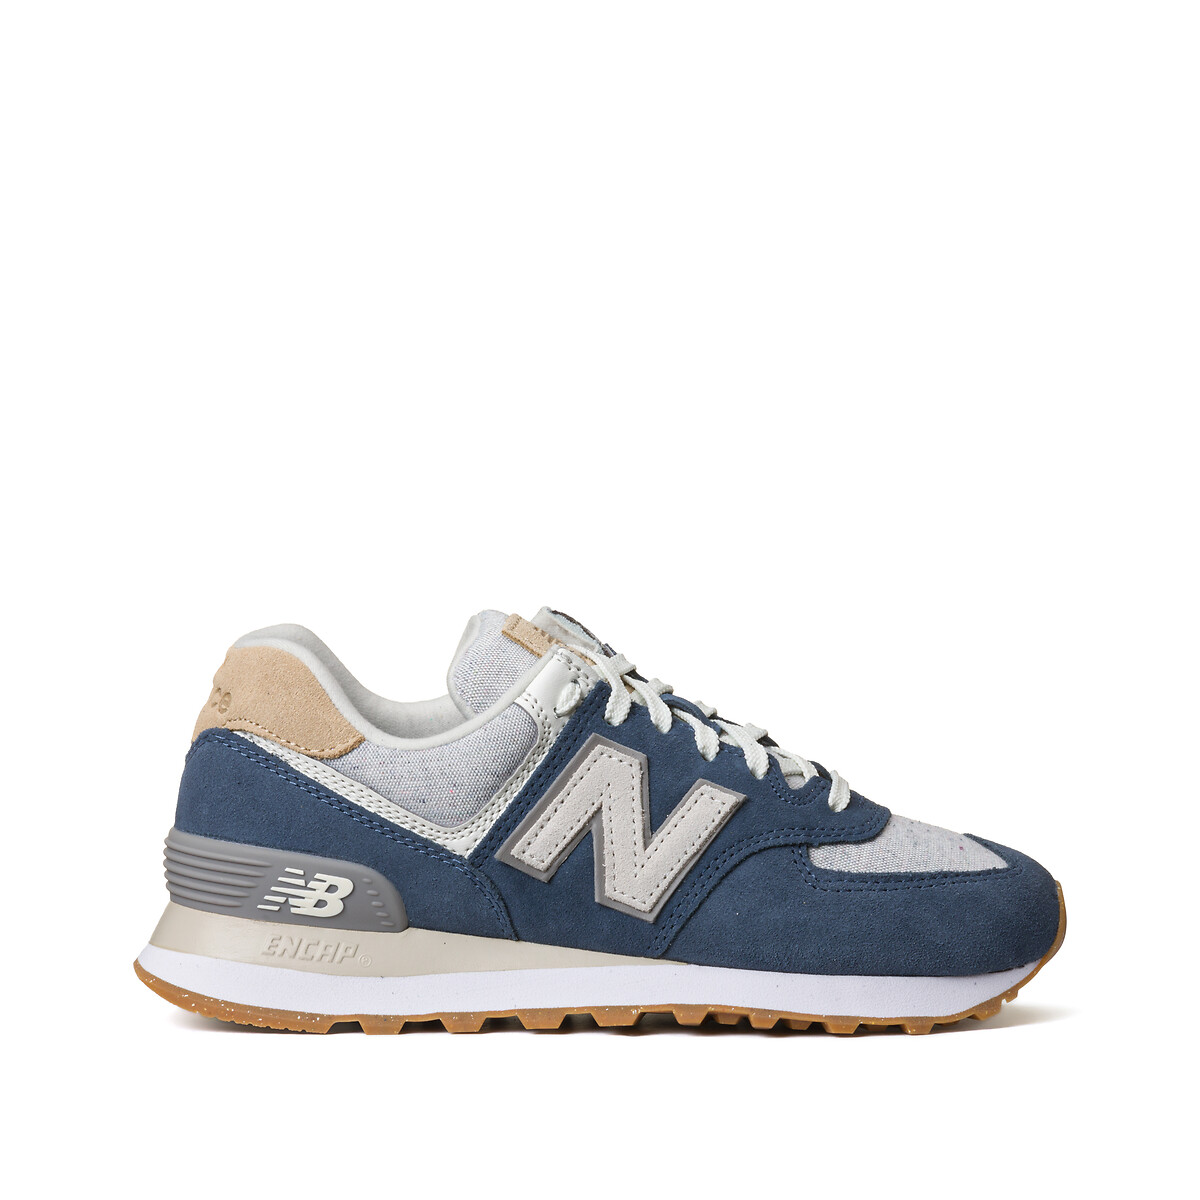 Suede trainers , blue, New Balance | La Redoute